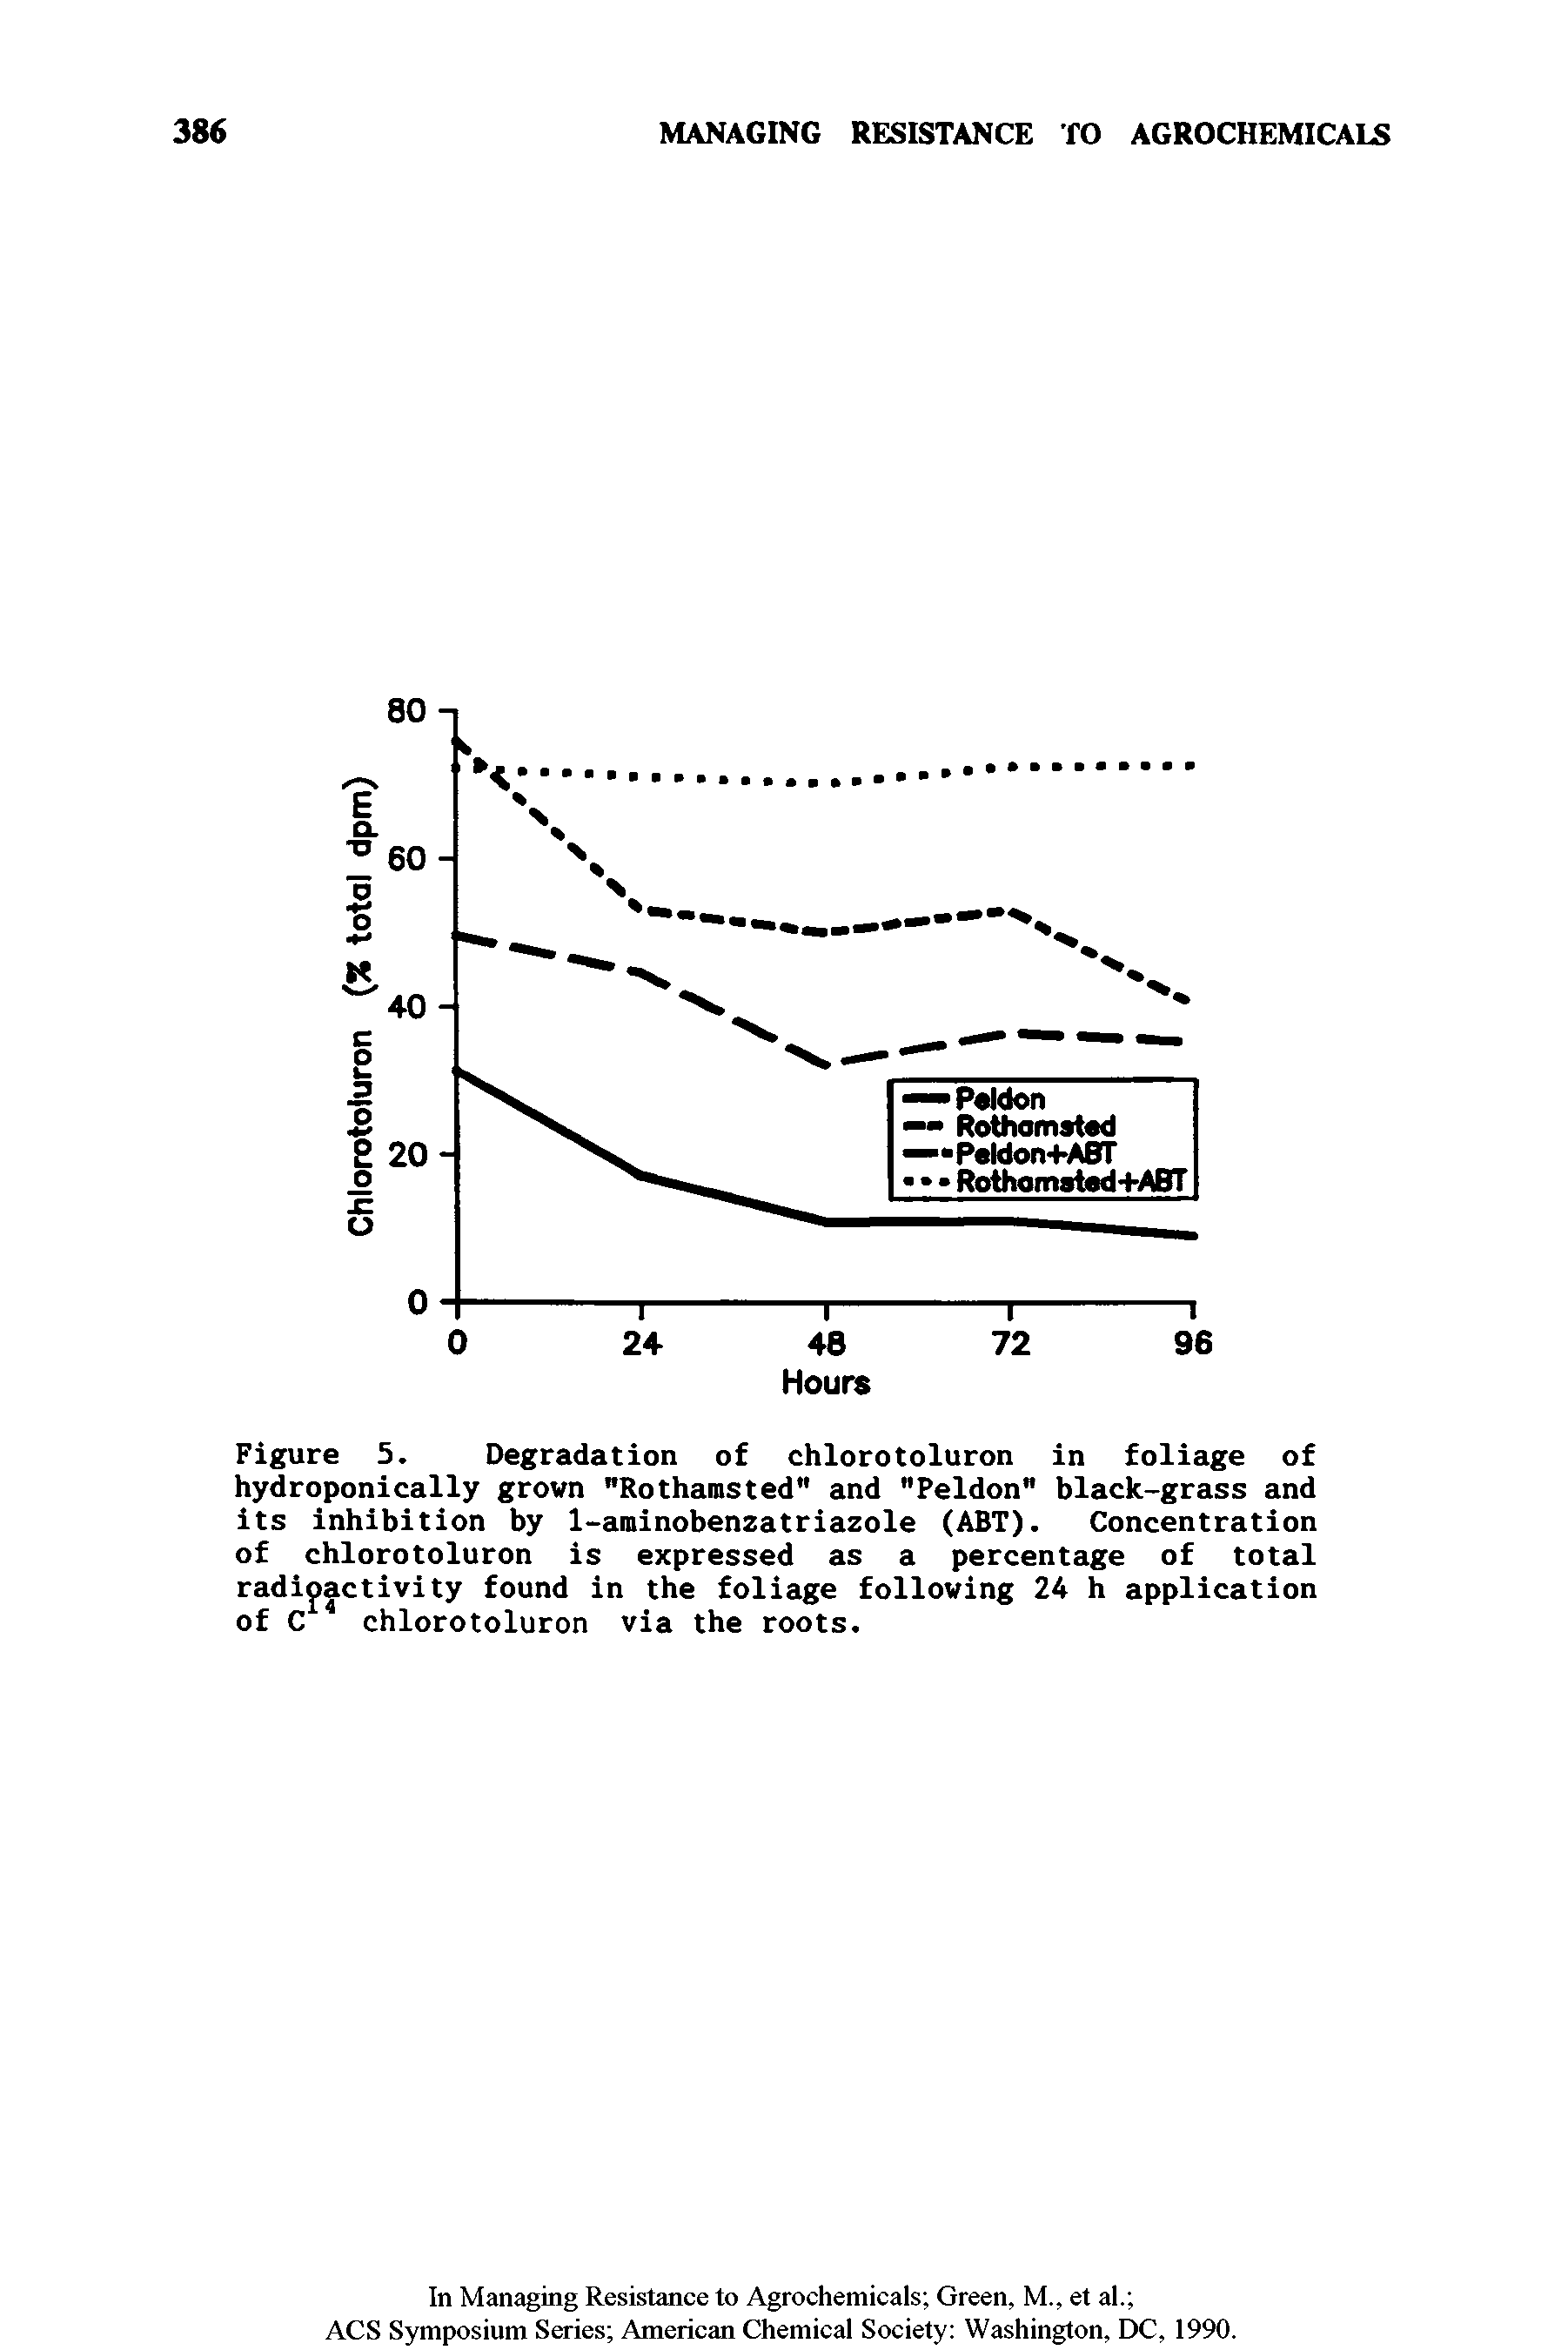 Figure 5. Degradation of chlorotoluron in foliage of hydroponically grown "Rothamsted" and "Peldon" black-grass and its inhibition by 1-aminobenzatriazole (ABT). Concentration of chlorotoluron is expressed as a percentage of total radioactivity found in the foliage following 24 h application of C chlorotoluron via the roots.